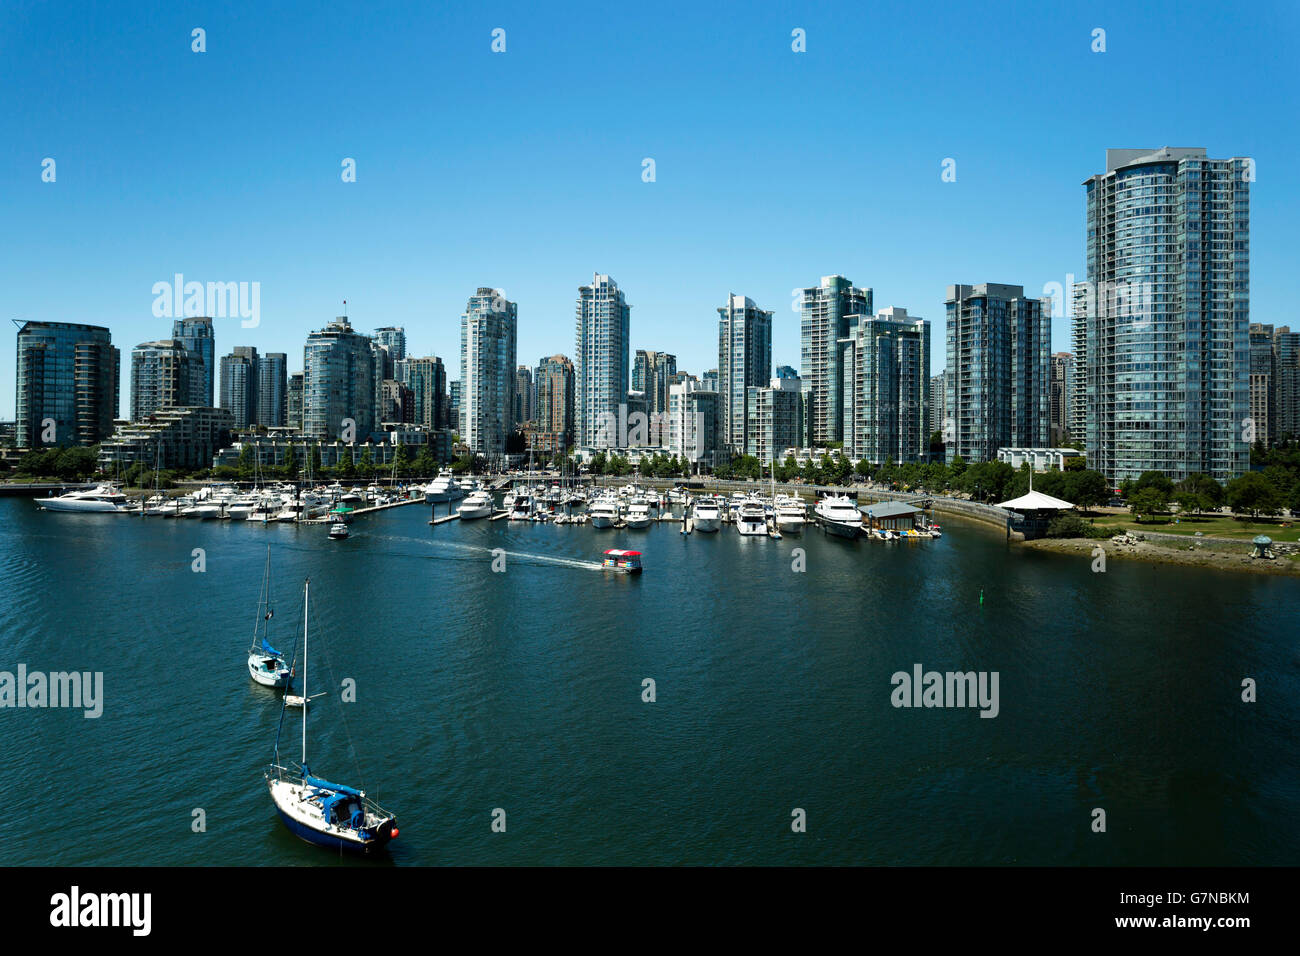 Skyline cityscape overlooking False Creek and Yaletown located in Vancouver, British Columbia, Canada. Stock Photo